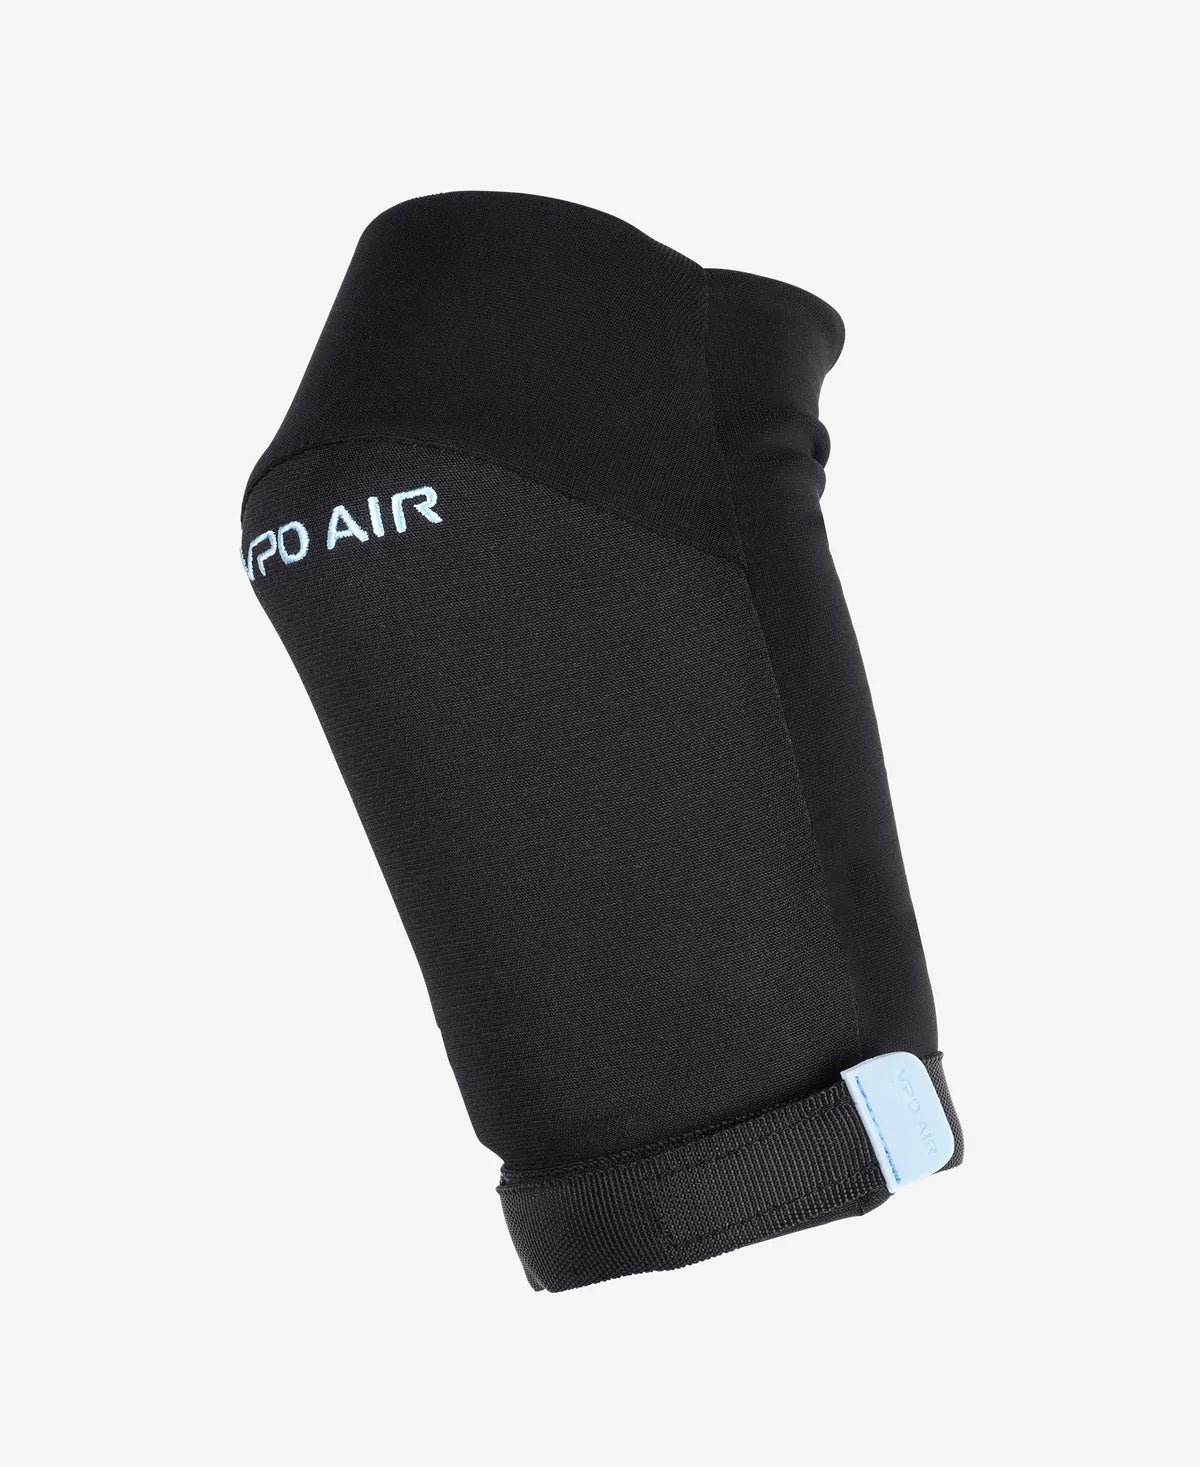 POC Joint VPD Air Elbow Protector - Mountain Kids Outfitters: Black, Side View